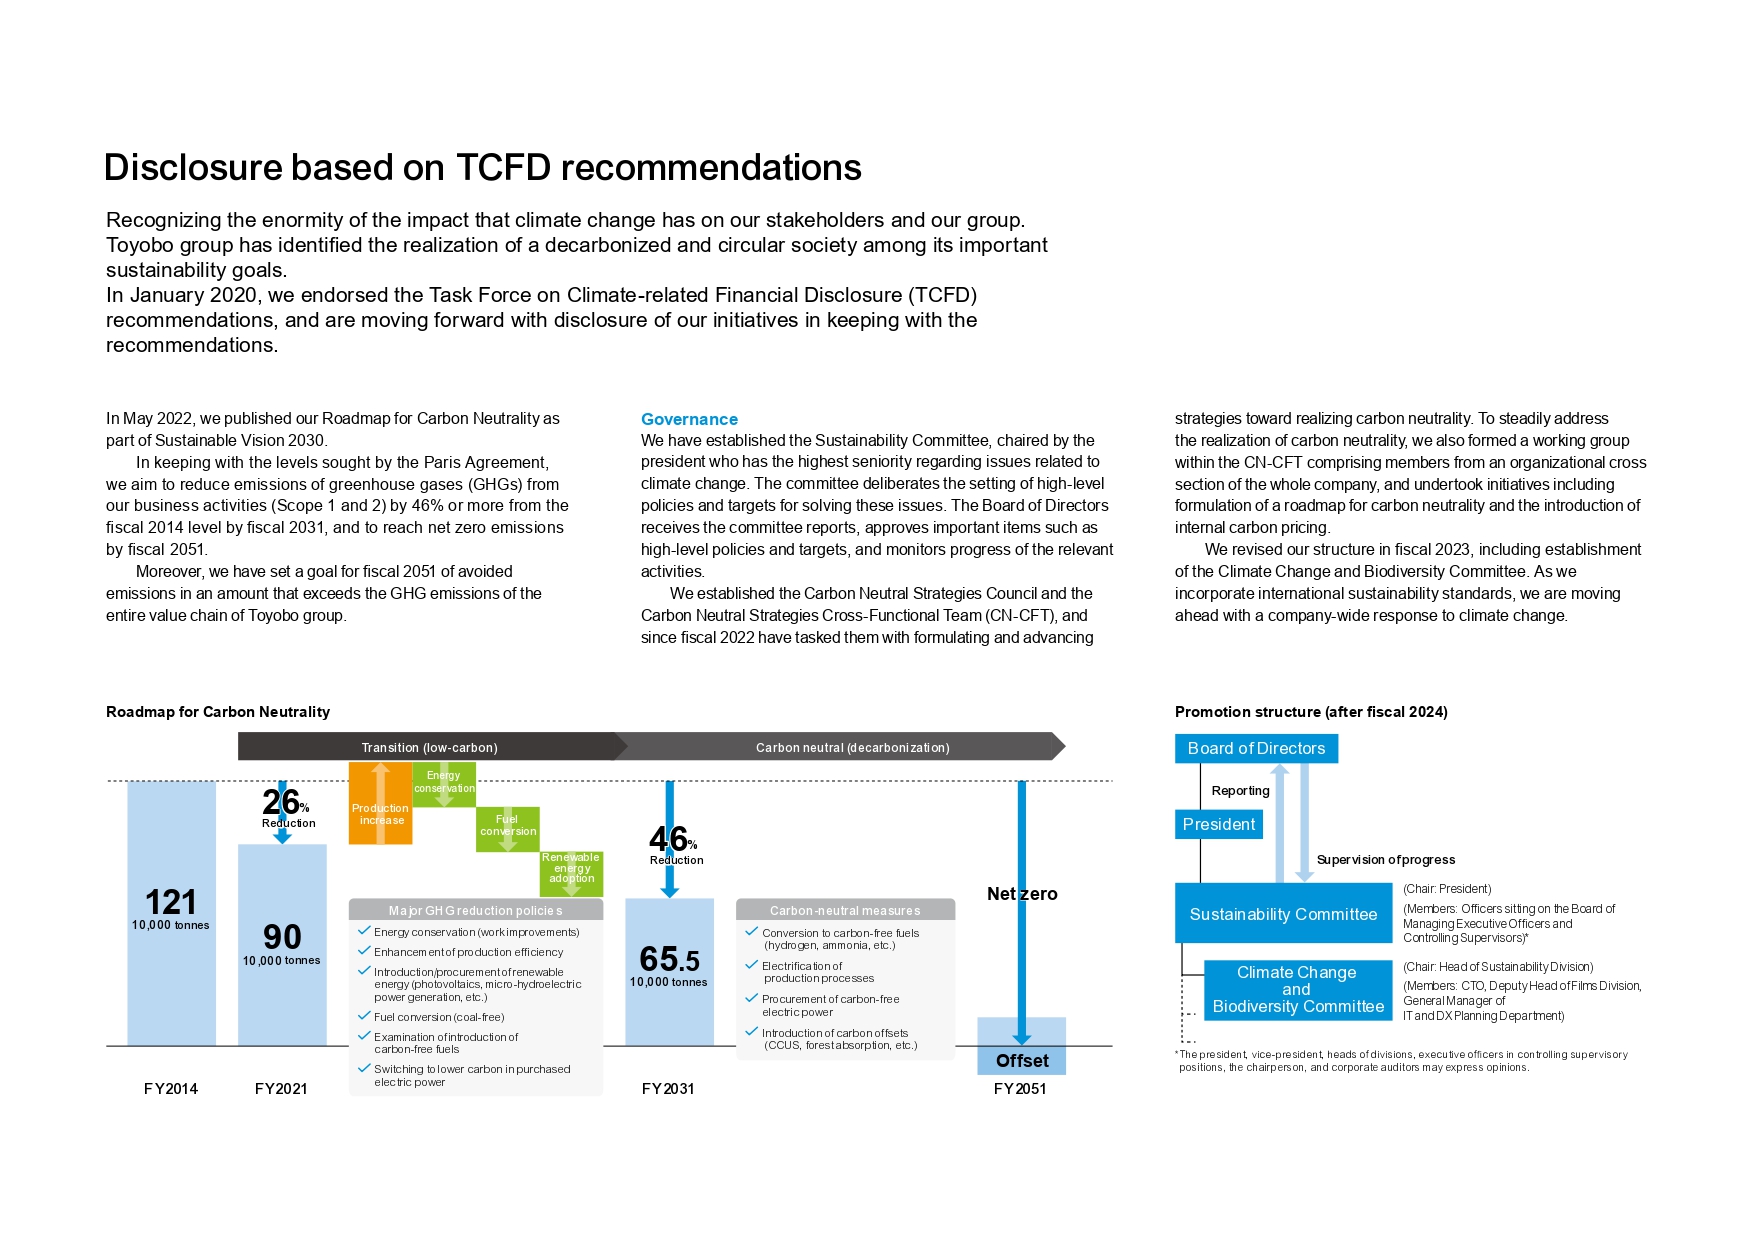 Disclosure based on TCFD Recommendations in the Integrated Report 2022